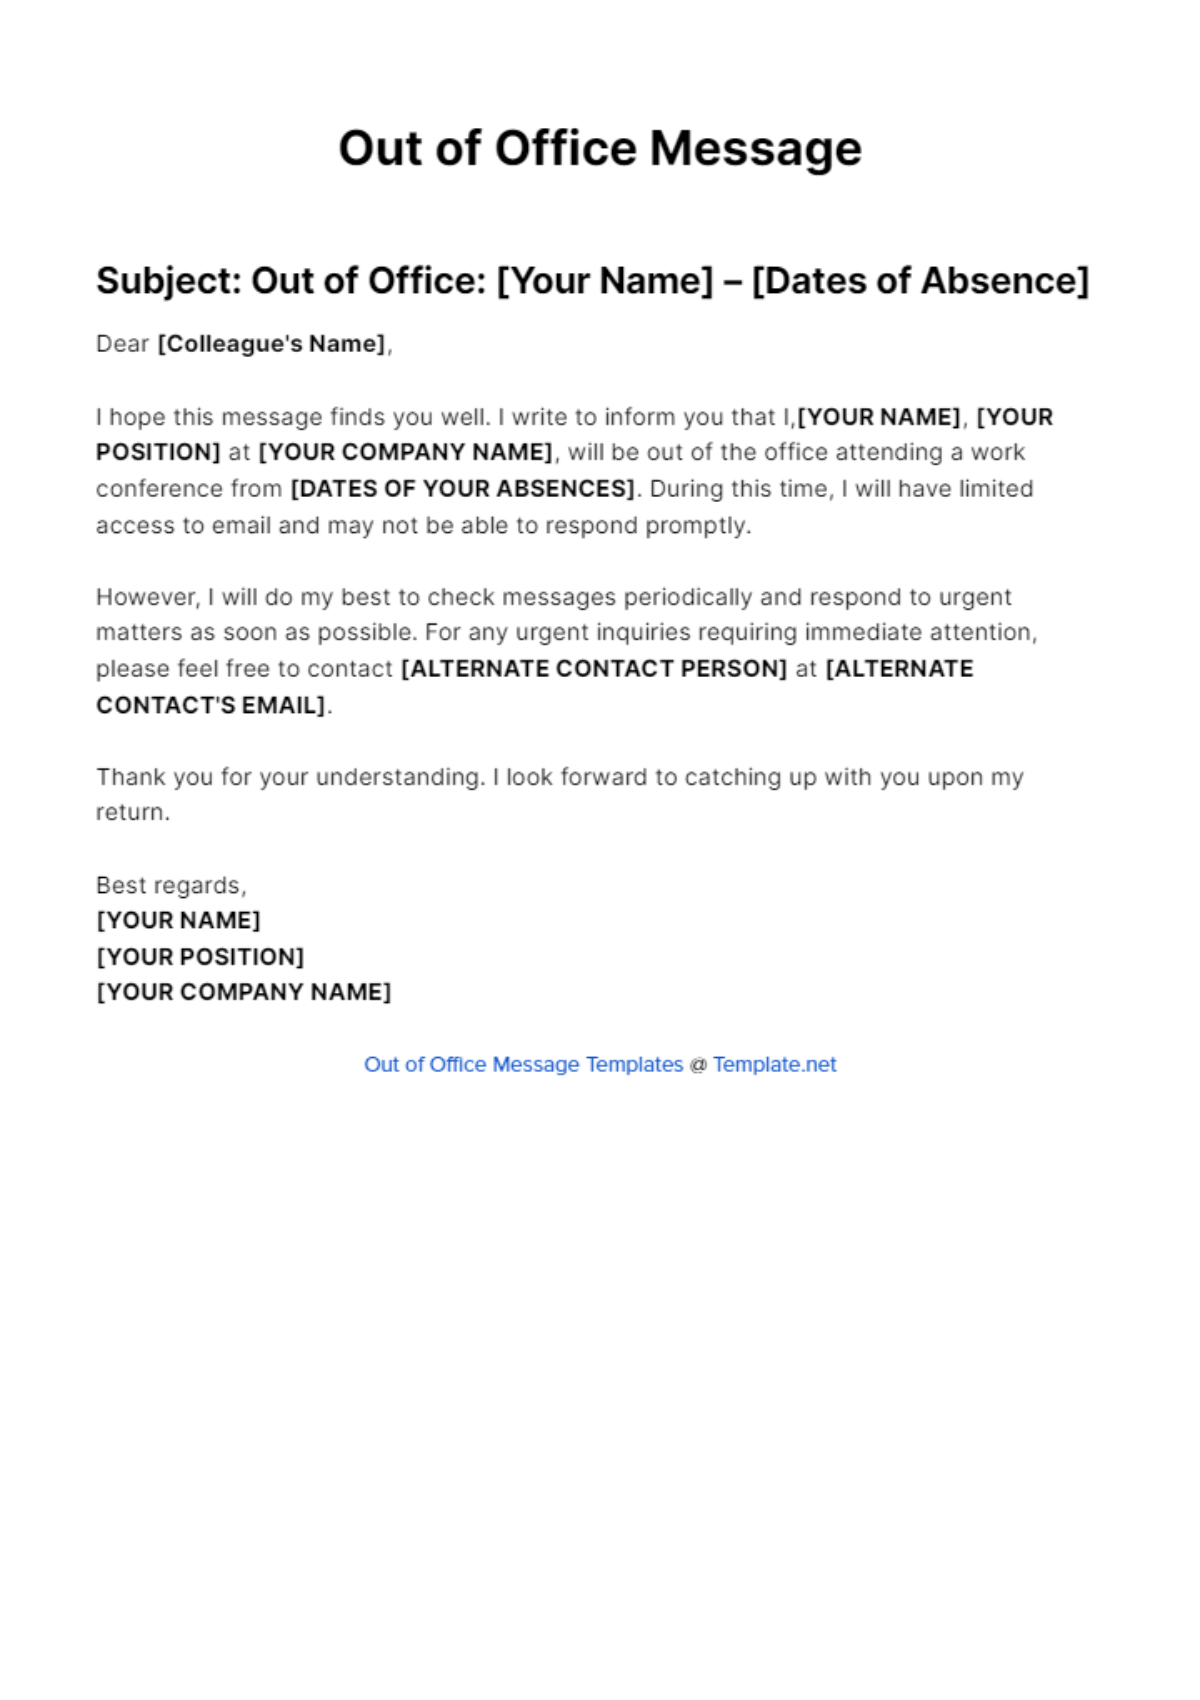 Work Conference Out Of Office Message Template